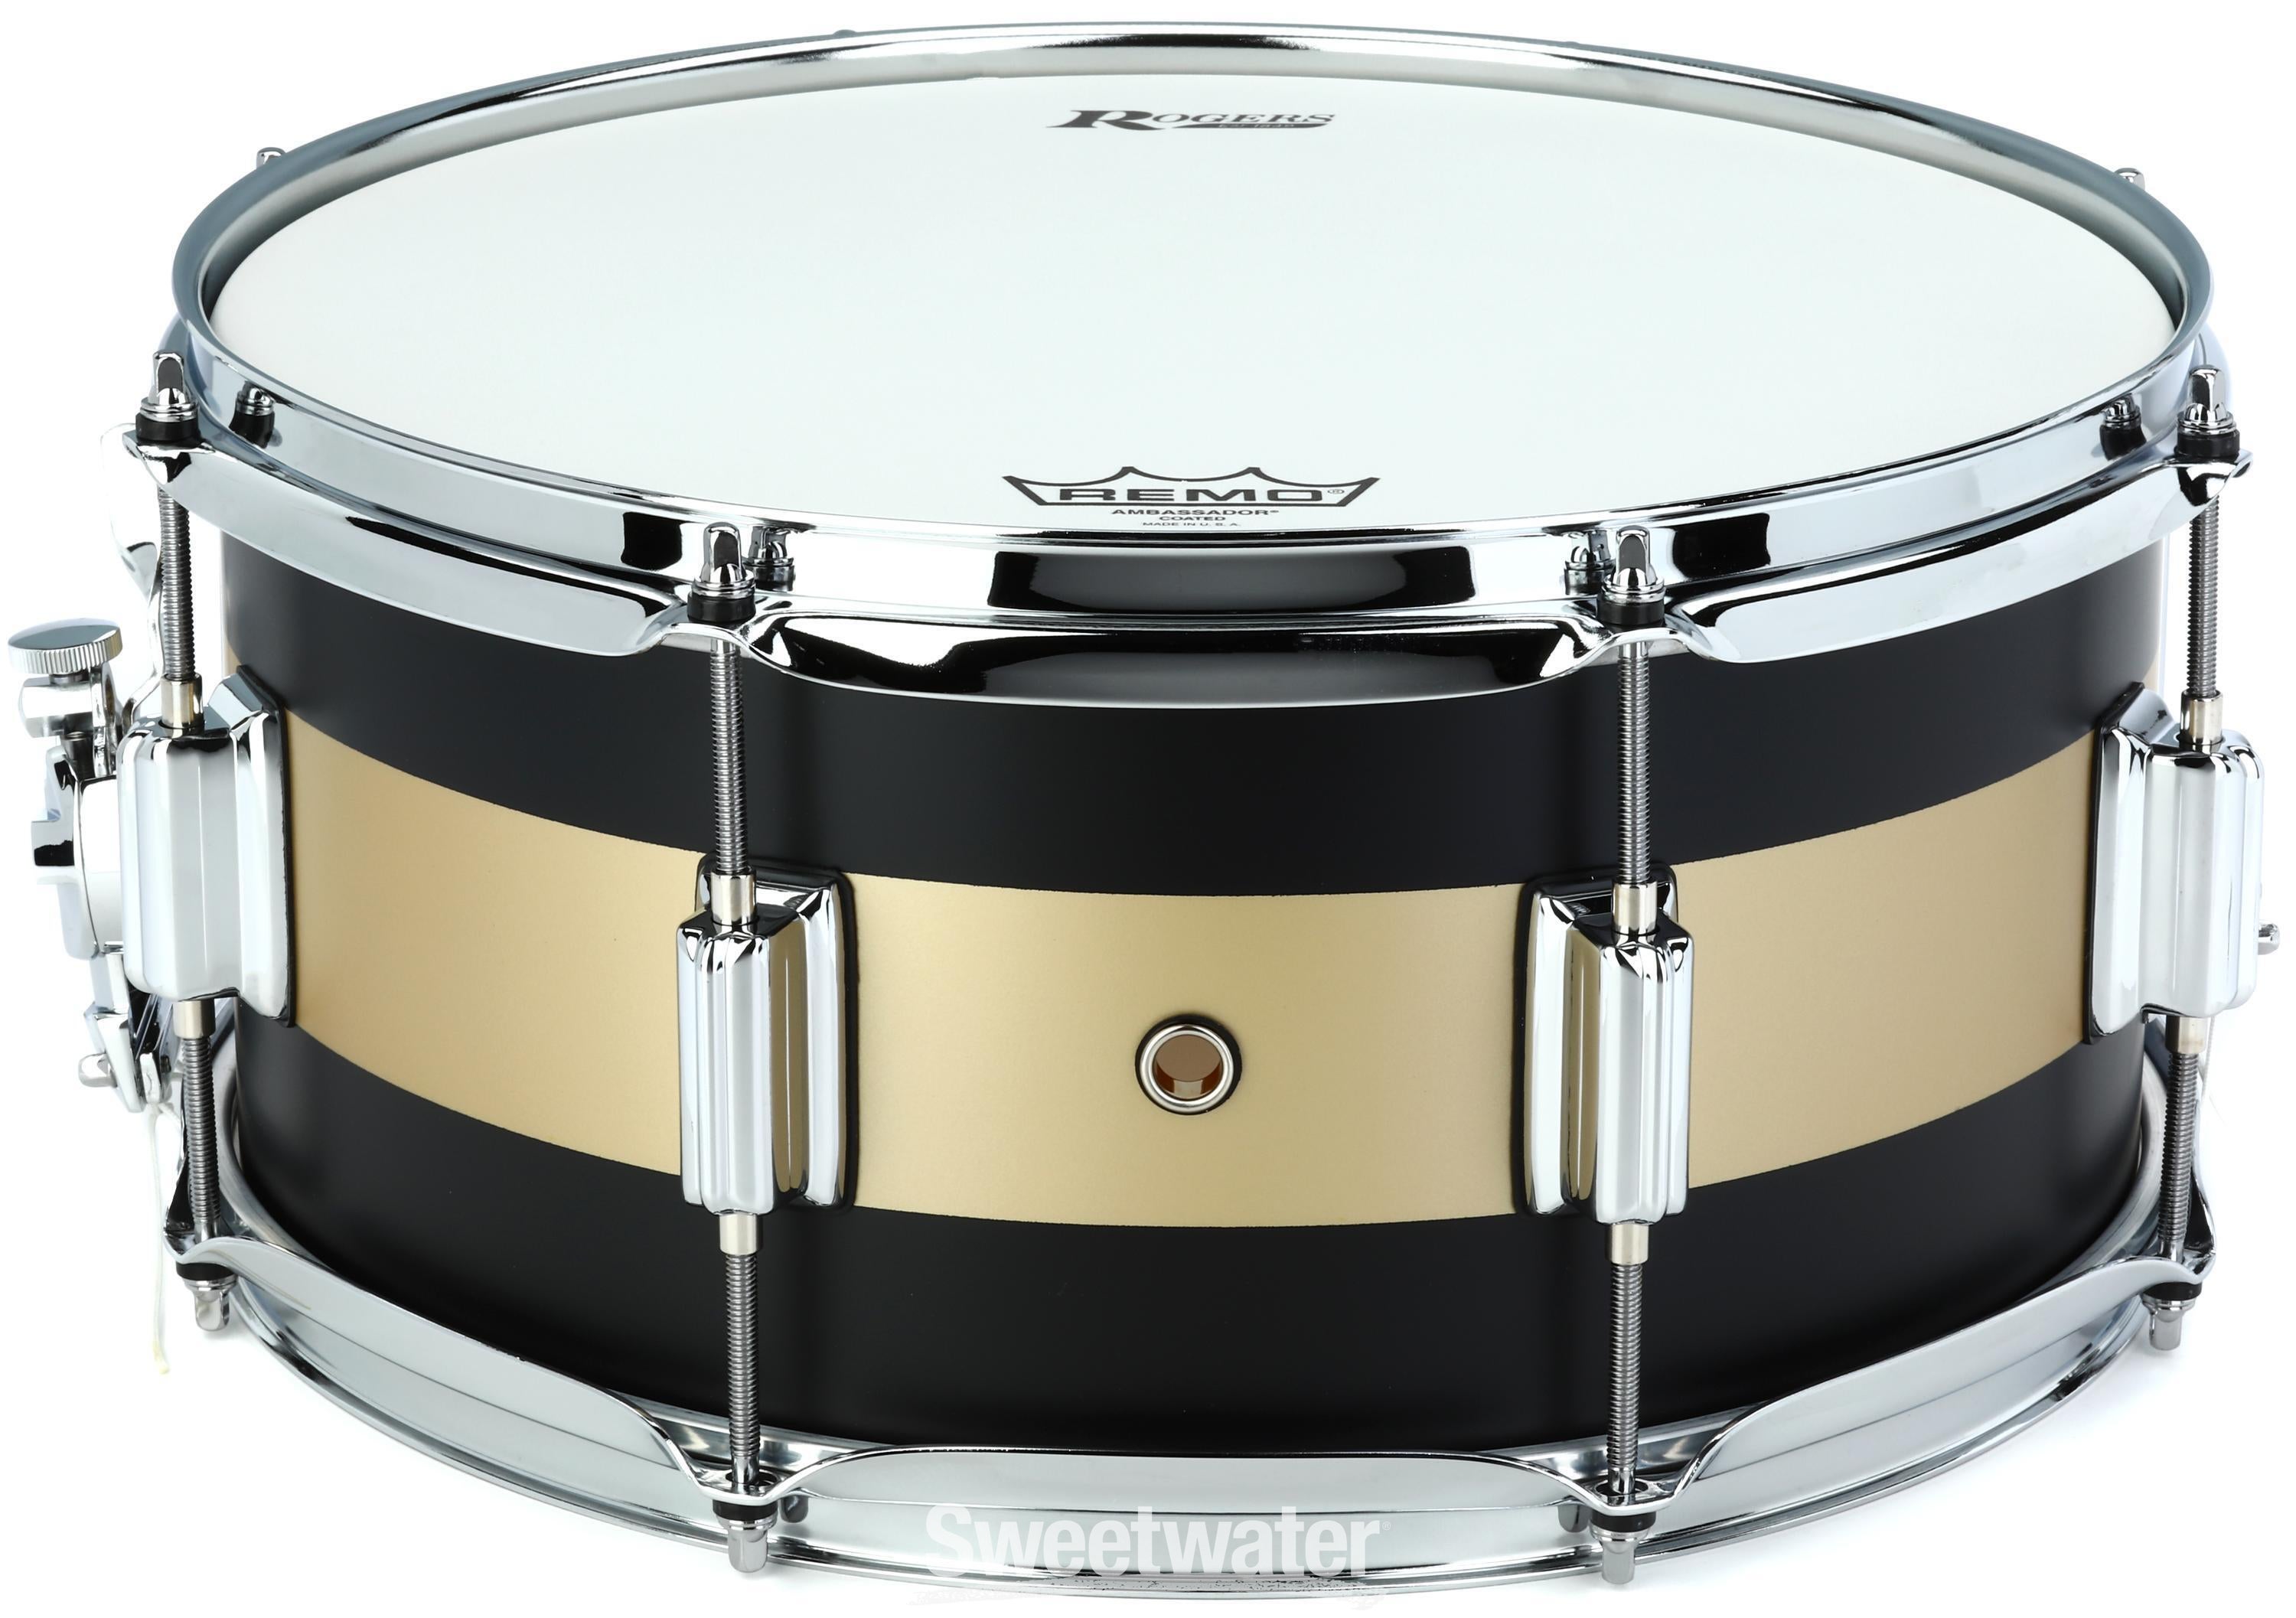 Tower Series Snare Drum - 6.5 x 14-inch - Satin Black/Gold Duco